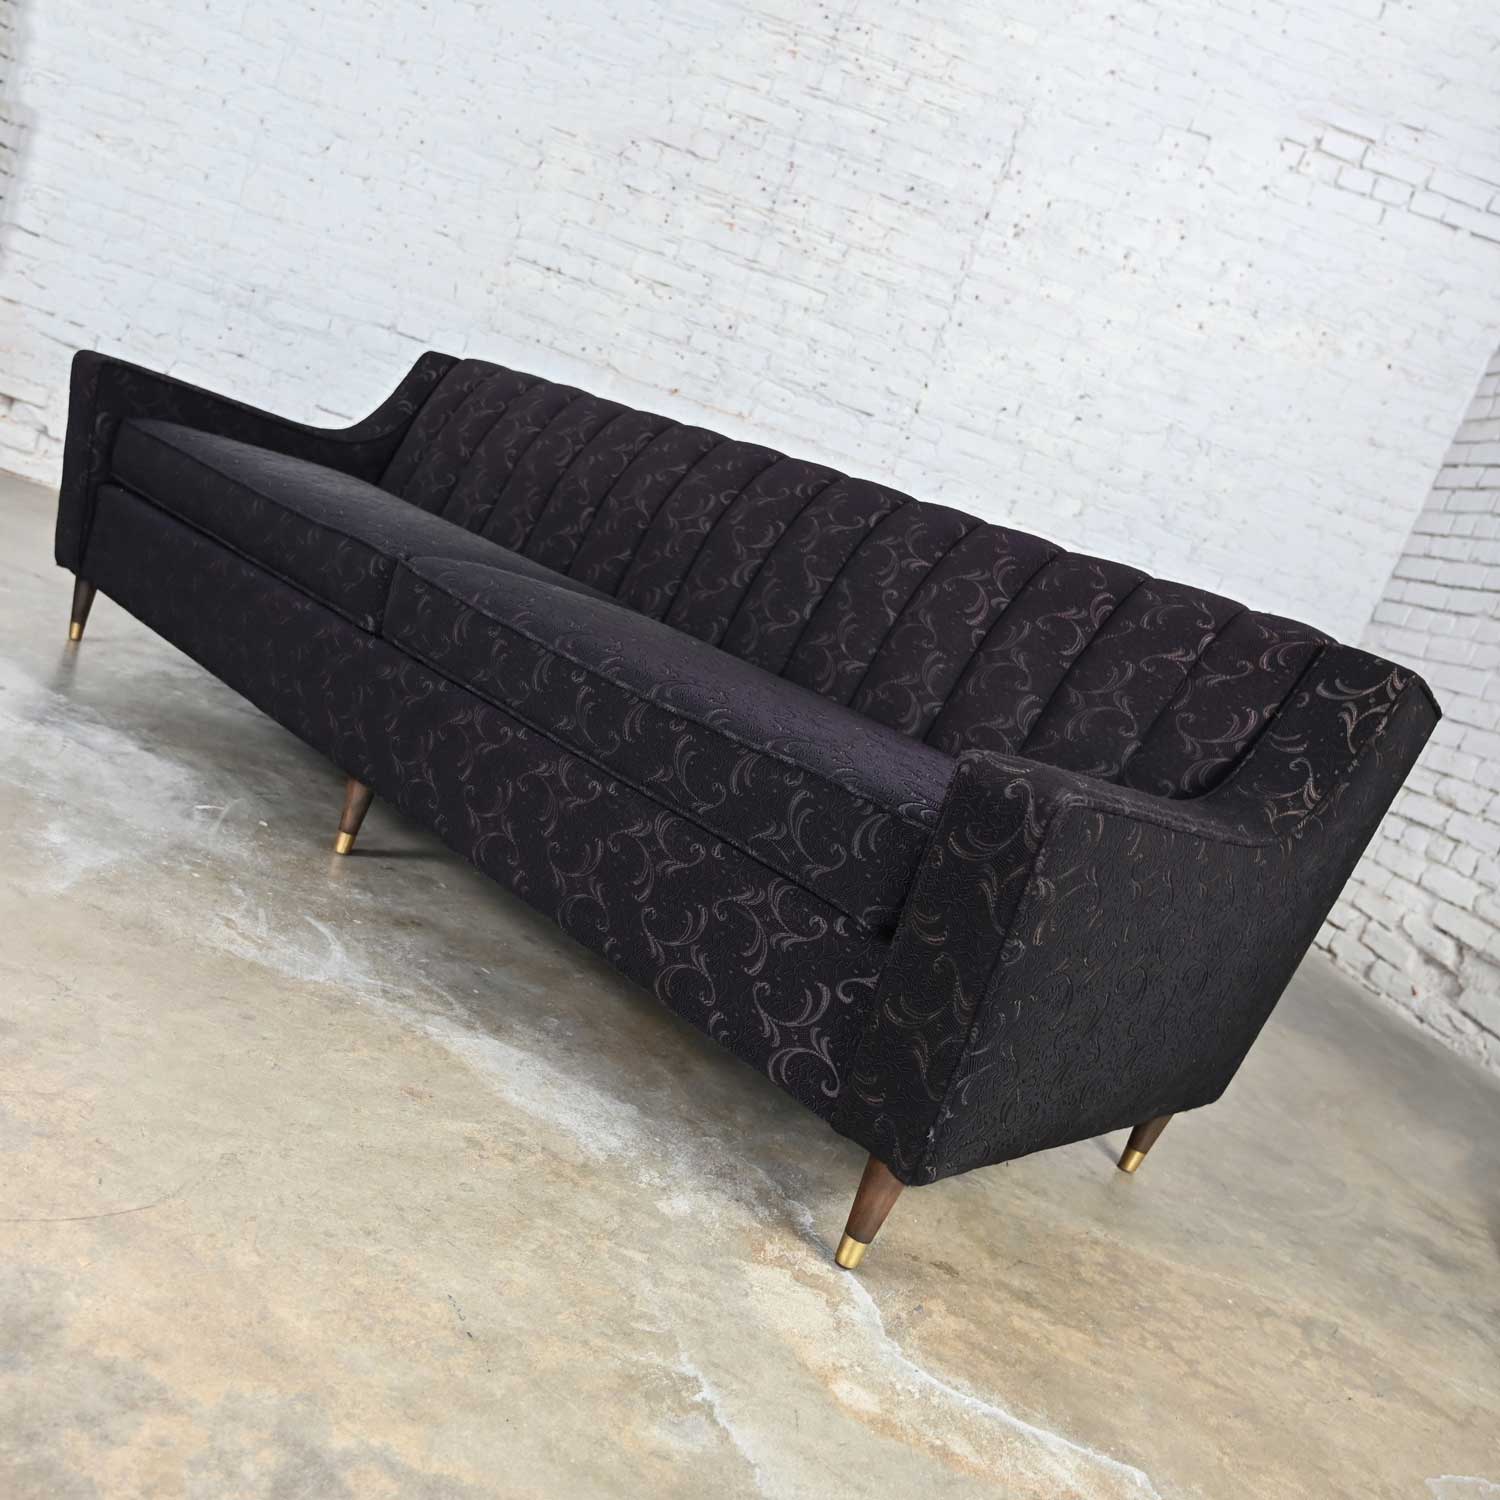 Vintage Mid-Century Modern Modified Lawson Style Sofa Black Frieze Fabric & Channeled Back